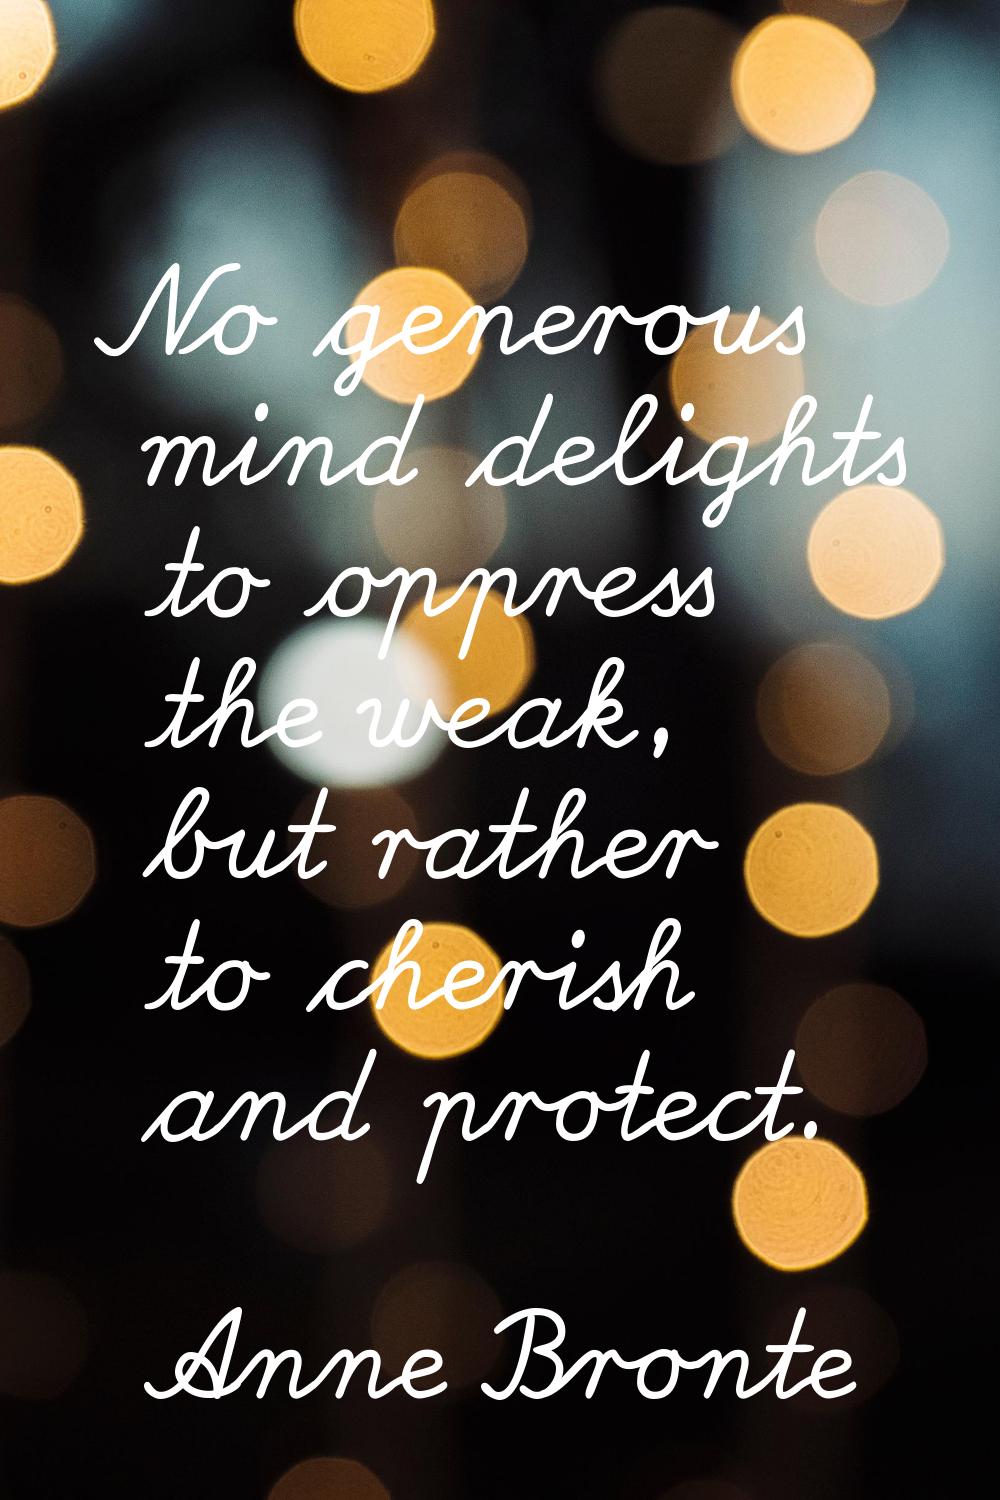 No generous mind delights to oppress the weak, but rather to cherish and protect.